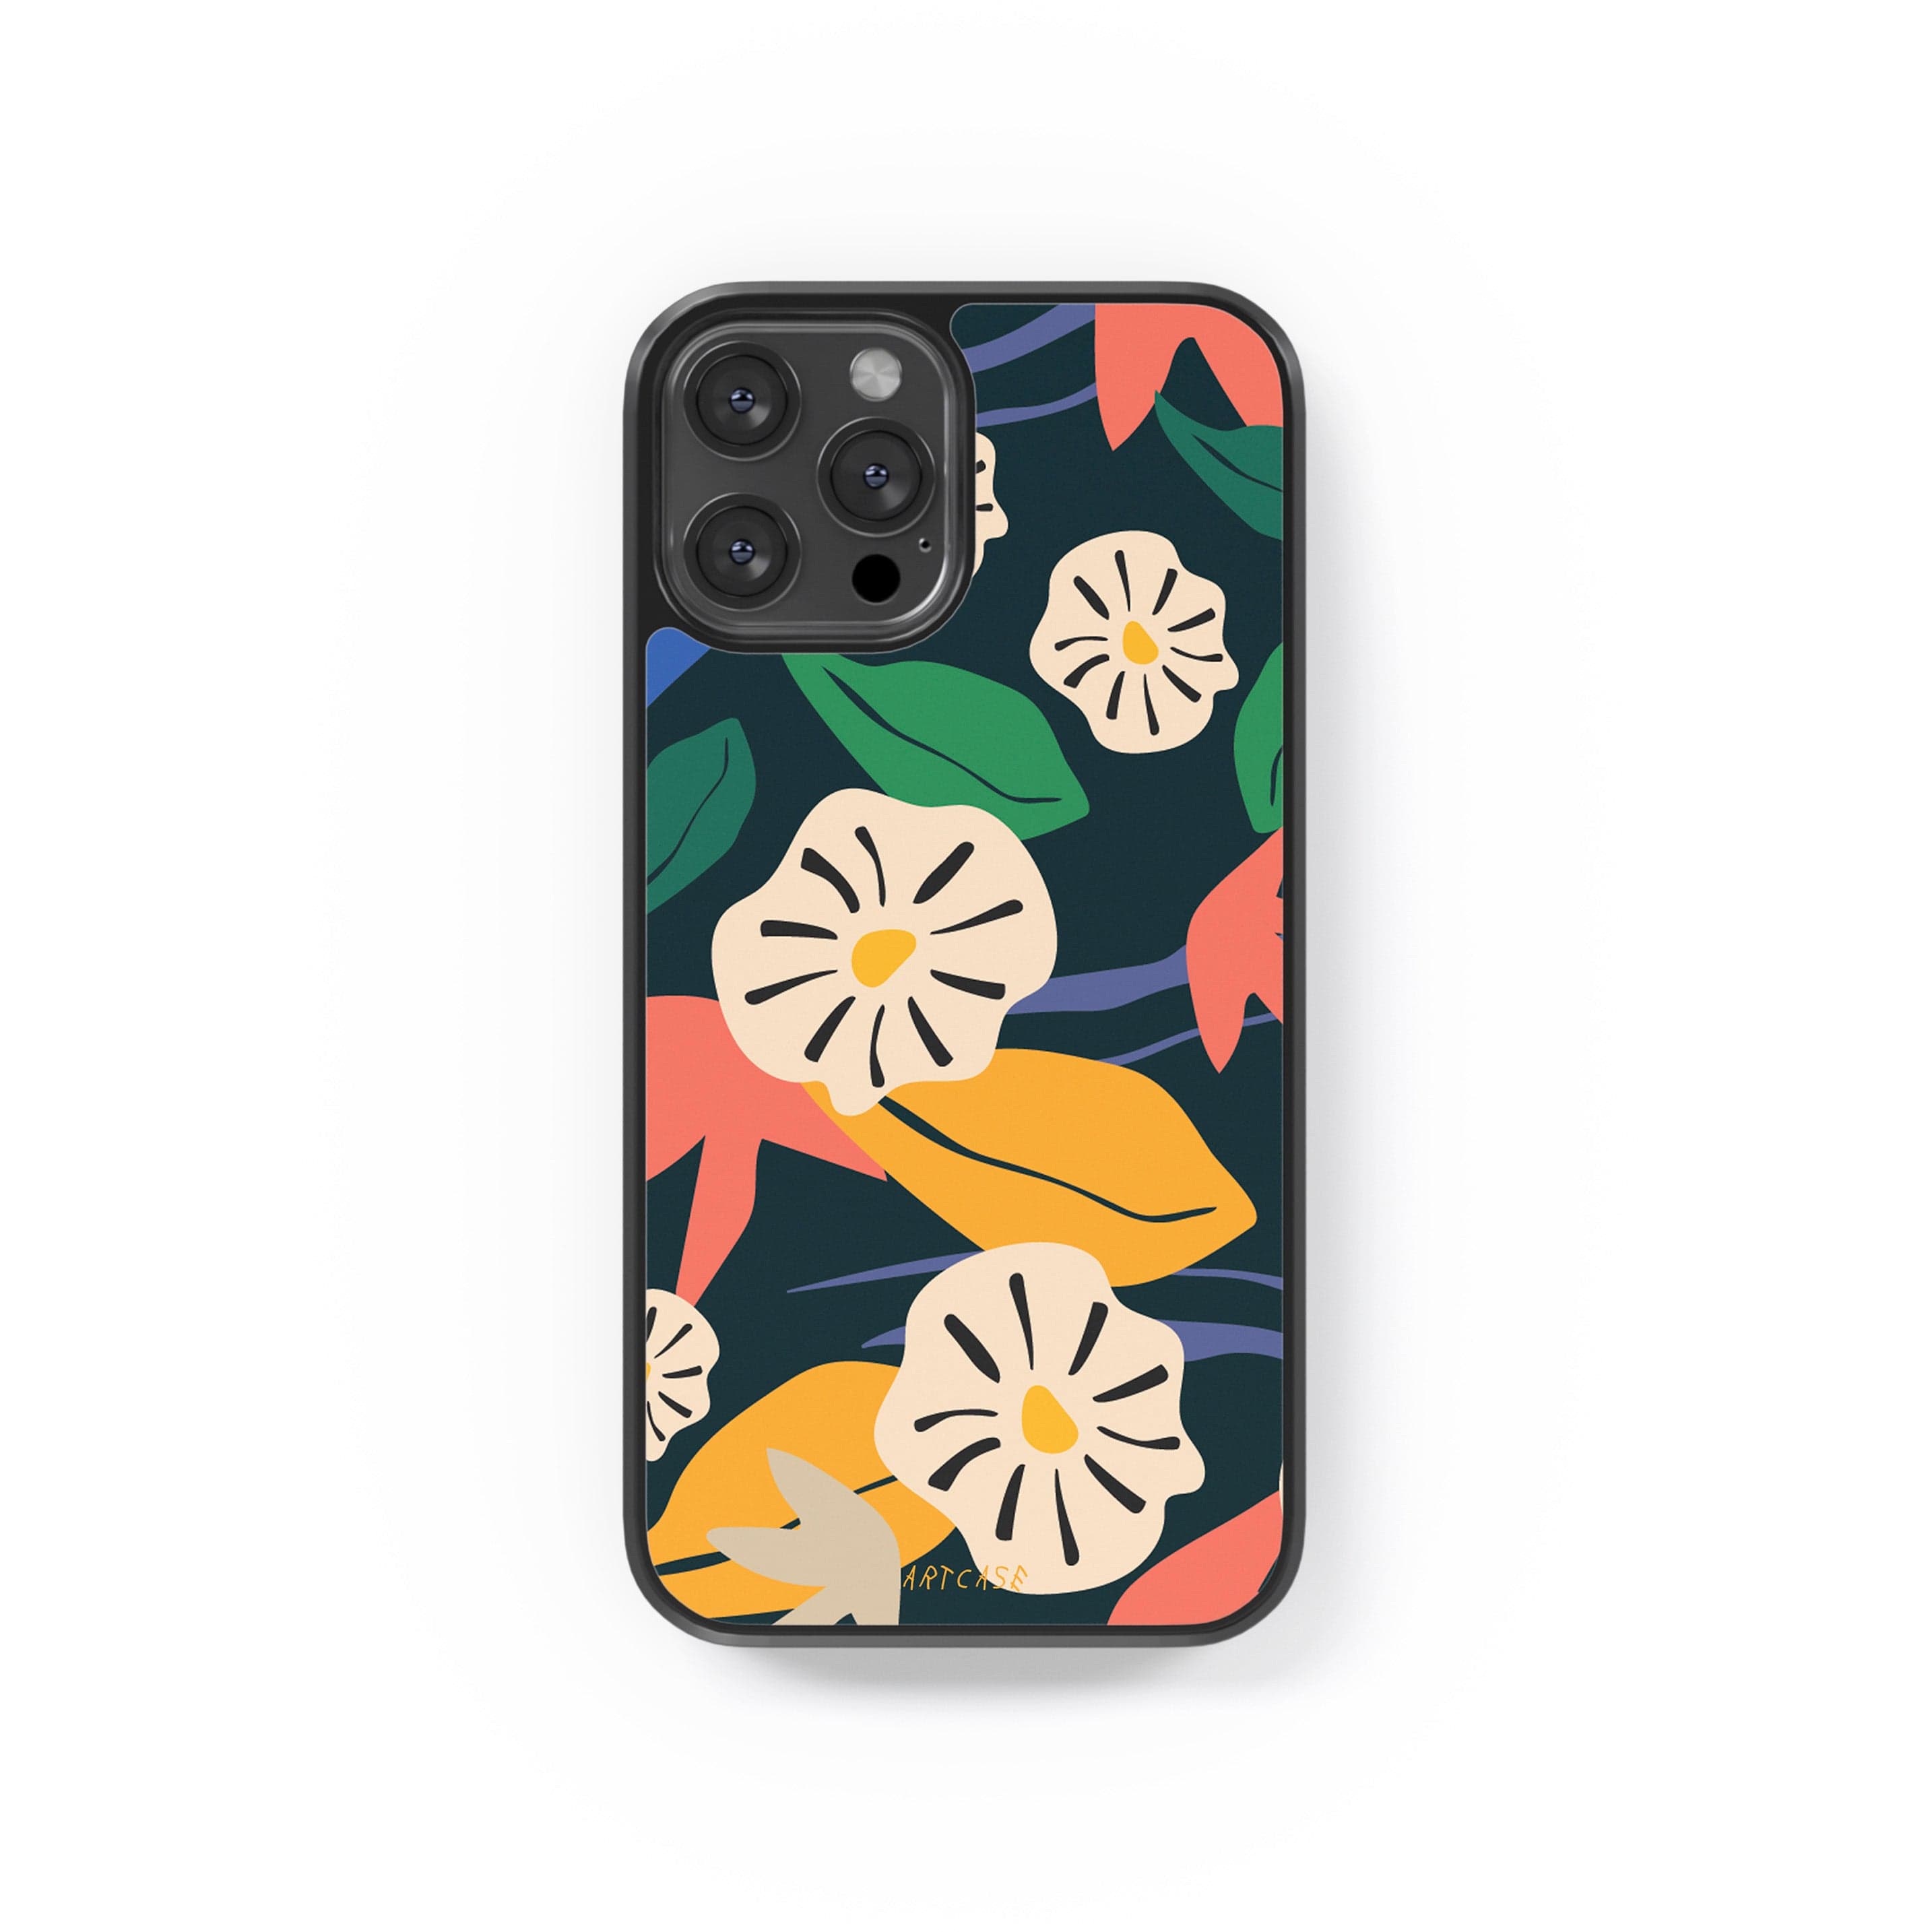 Phone case "Floral abstraction 2"